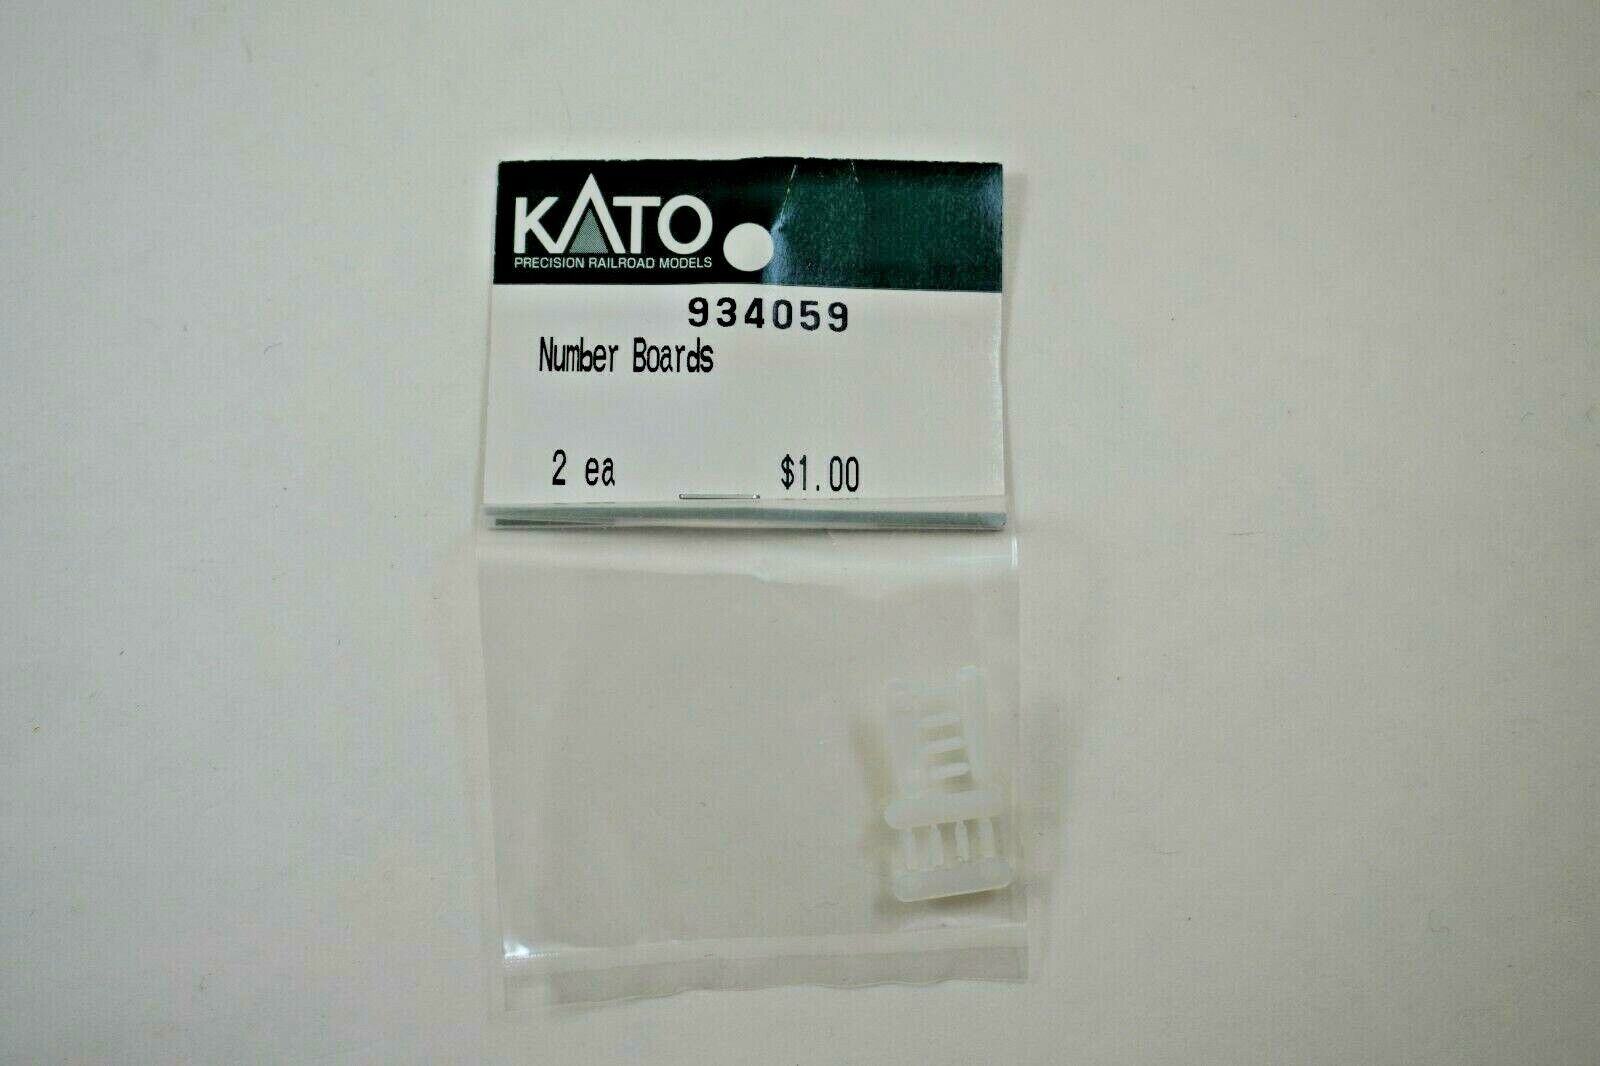 NOS Kato (2) NUMBER BOARDS N Scale Accessory - 934059